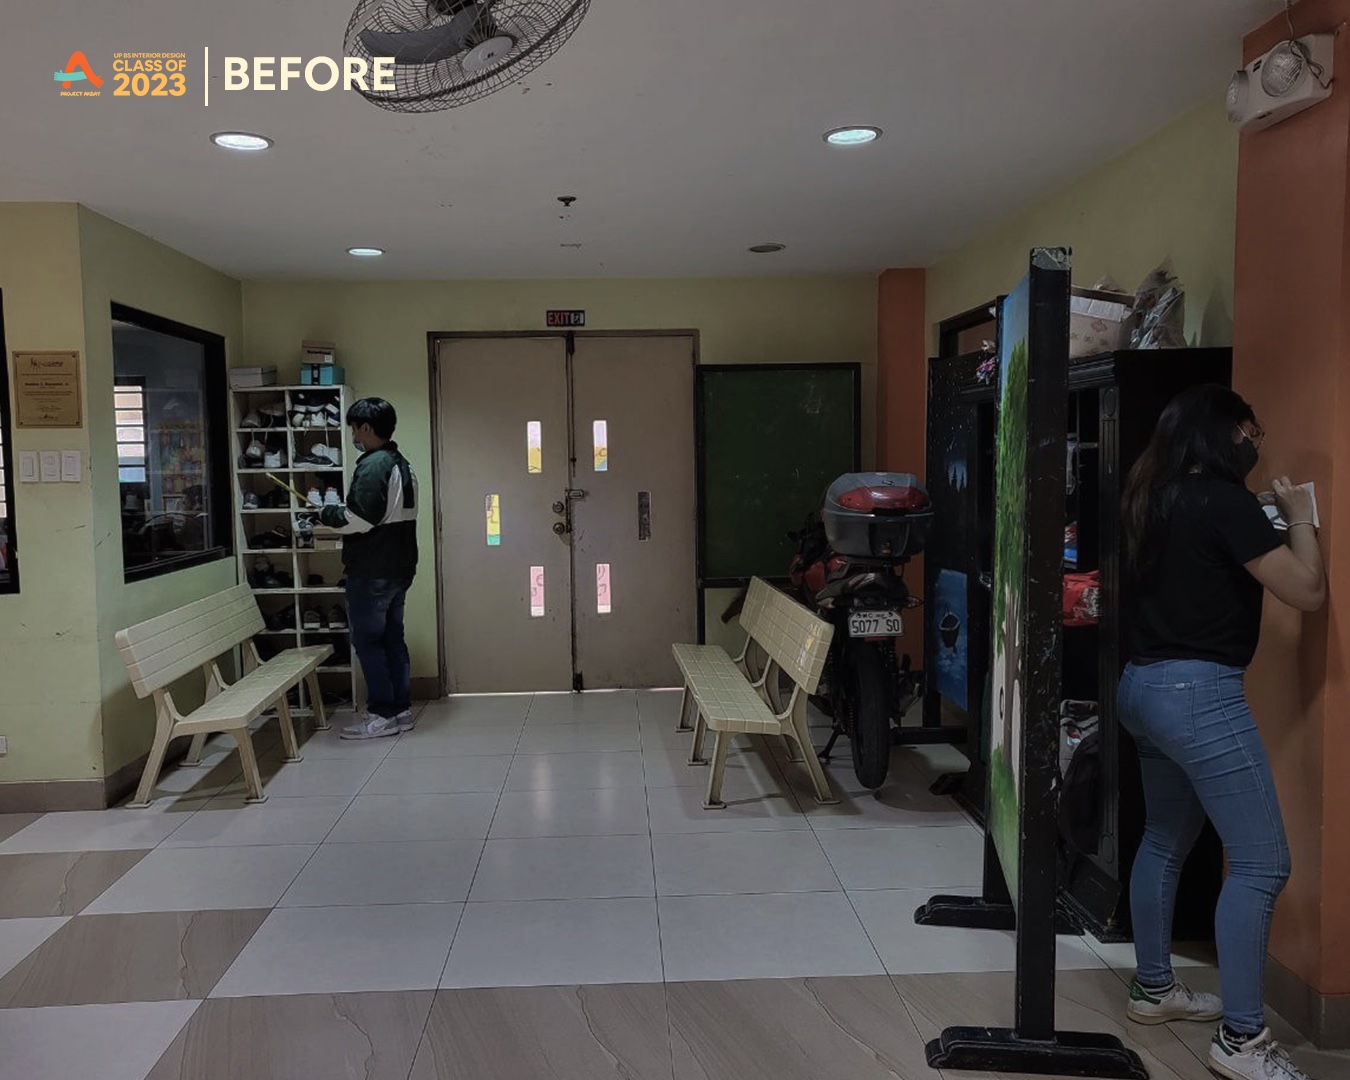 “Project Akbay” of UPD Interior Design Students Activity Area